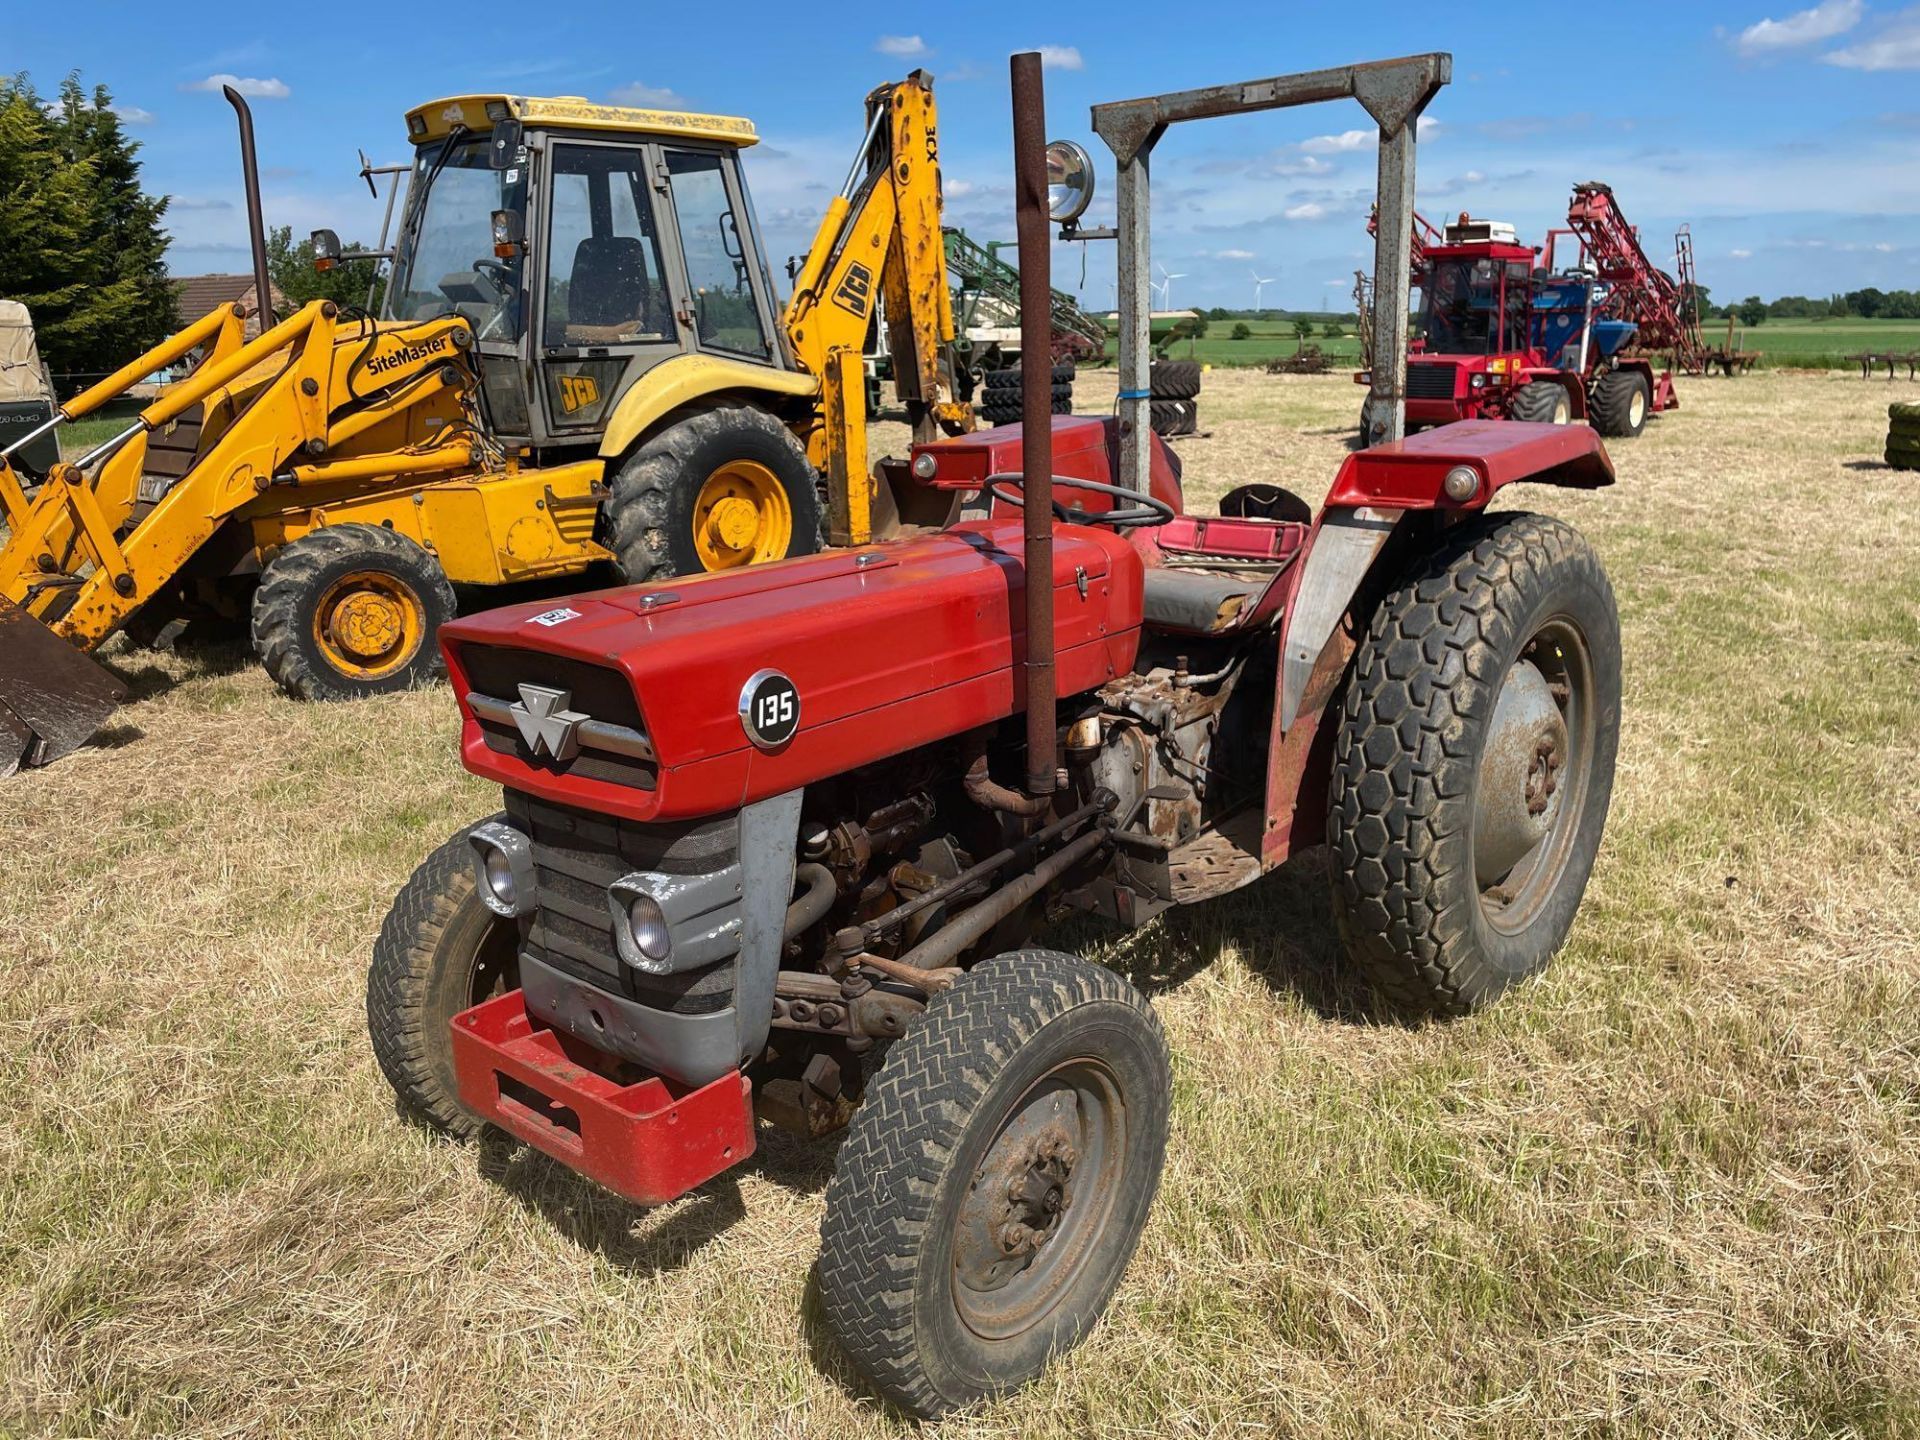 Massey Ferguson 135 2wd tractor with roll bar on 205R16 front and 12.4-28 rear wheels and tyres, die